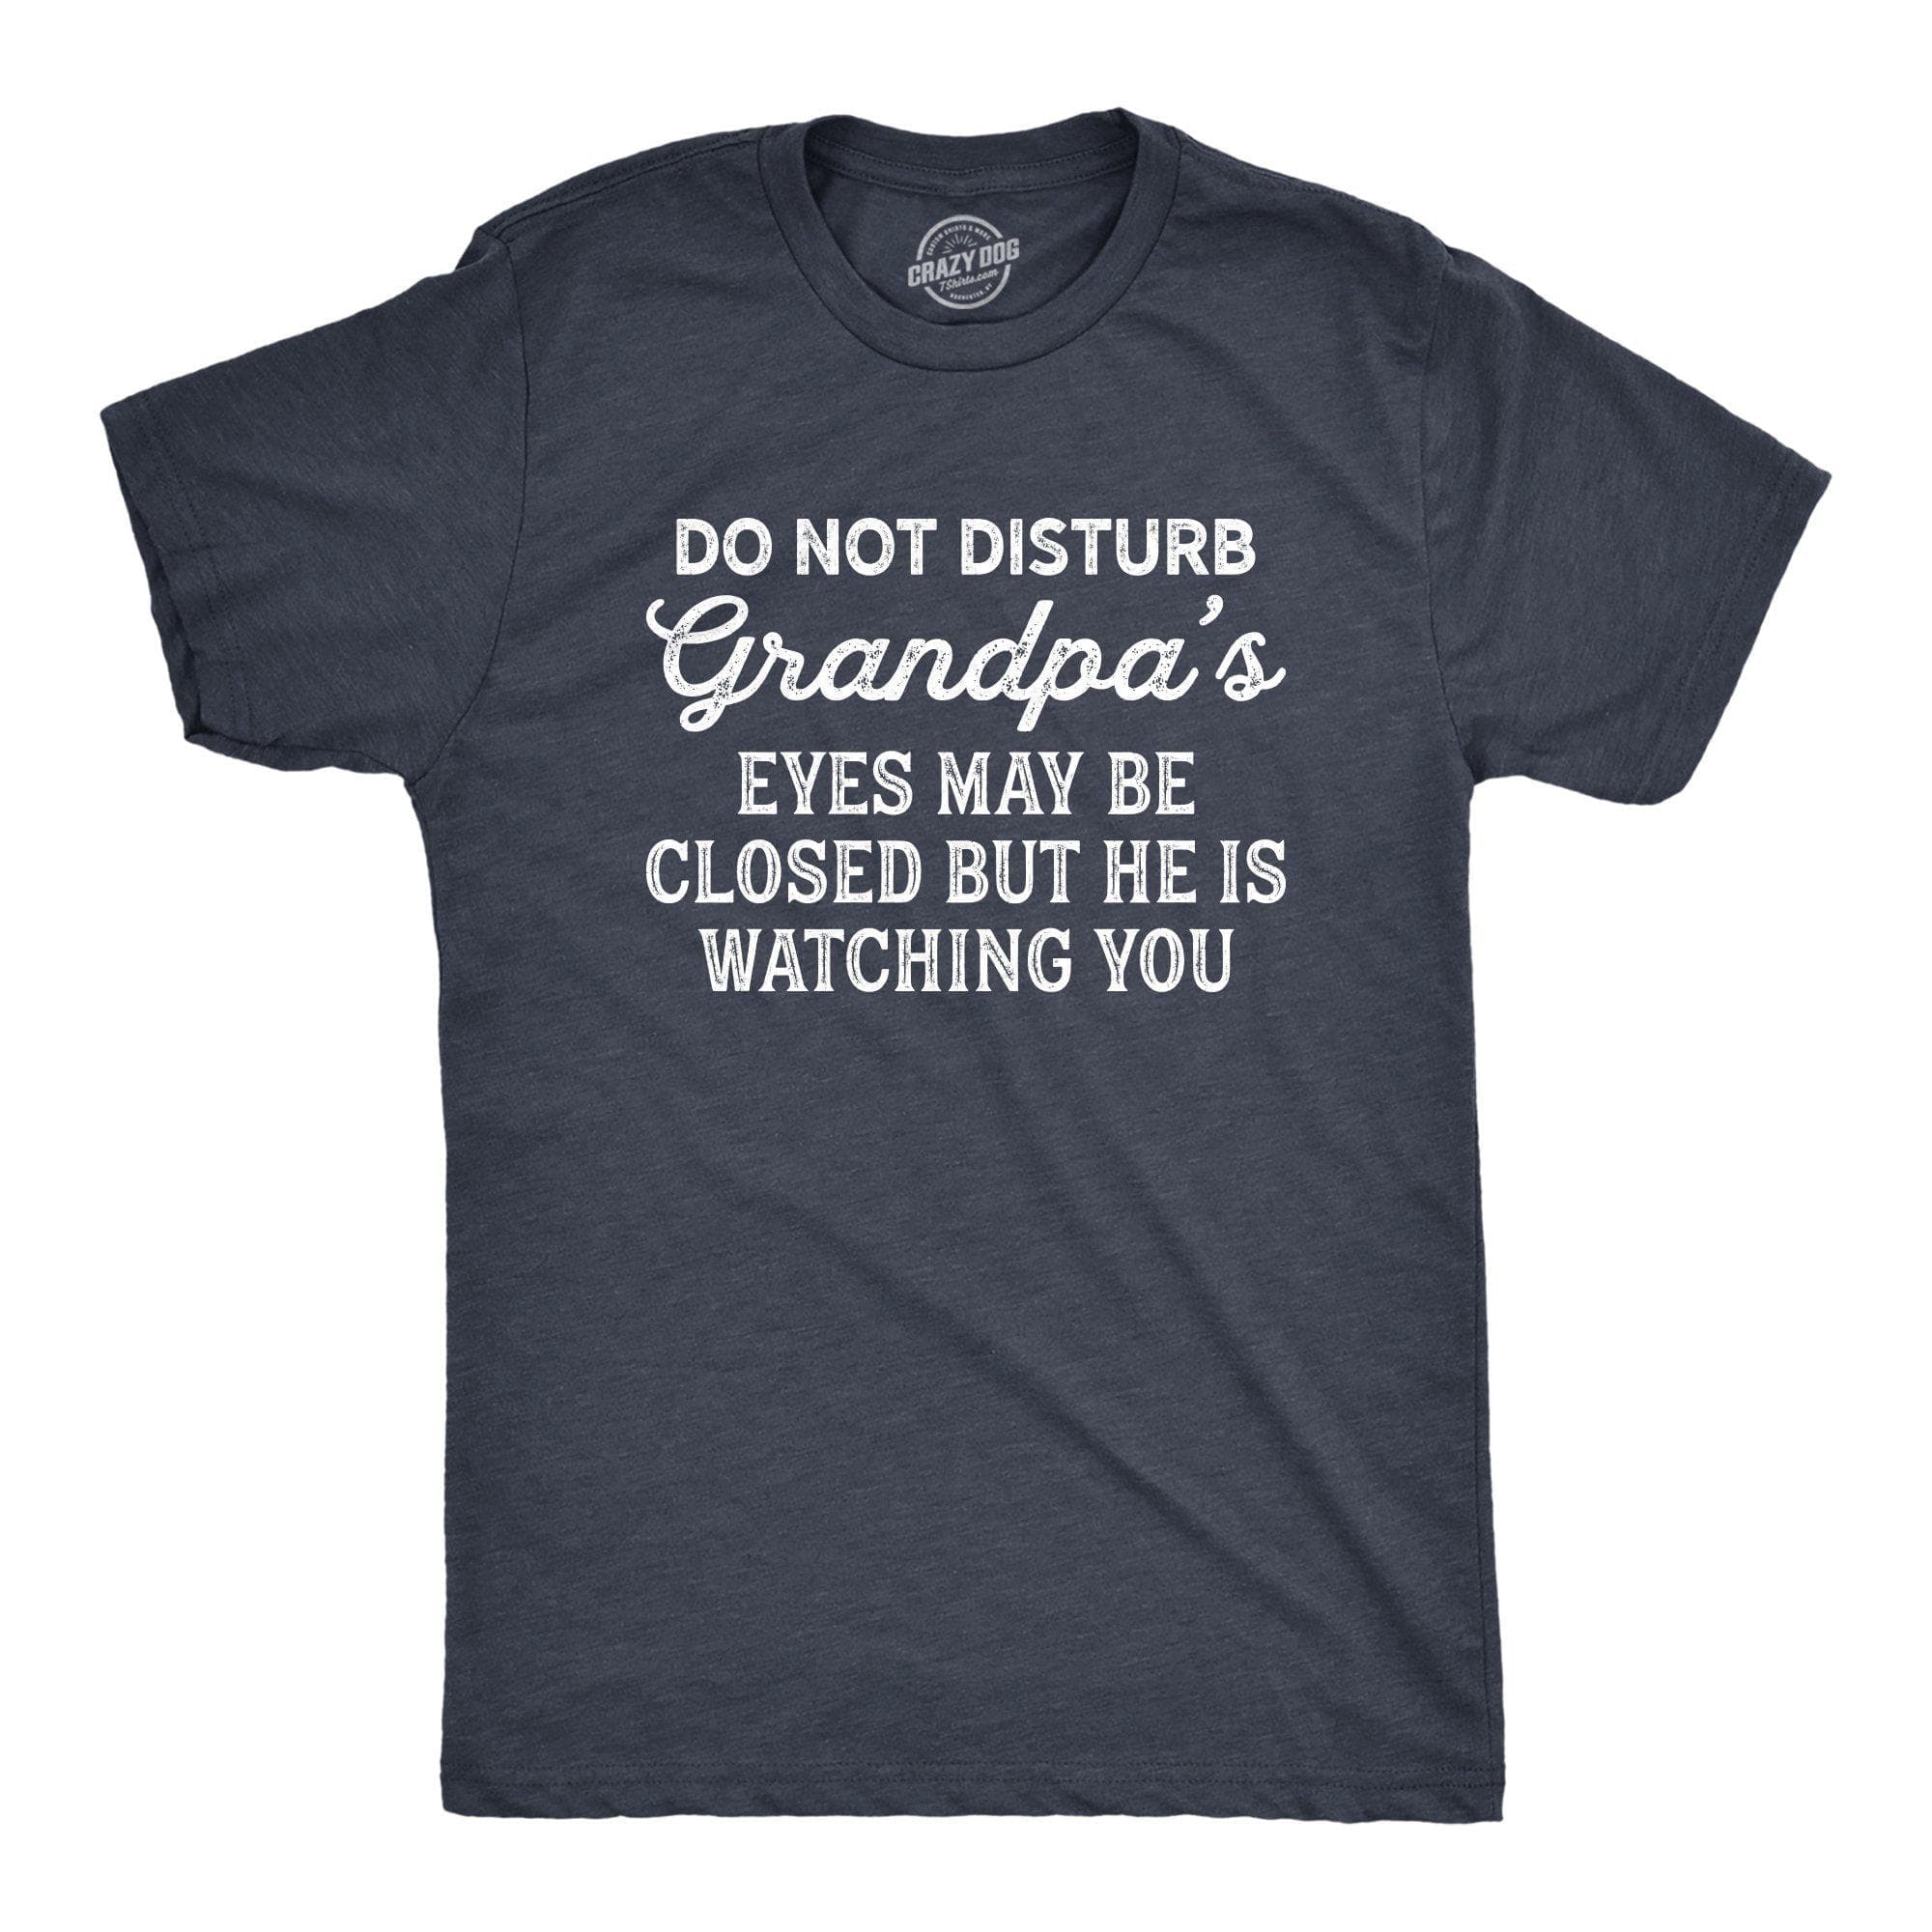 Do Not Disturb Grandpa's Eyes May Be Closed But He Is Watching You Men's Tshirt - Crazy Dog T-Shirts